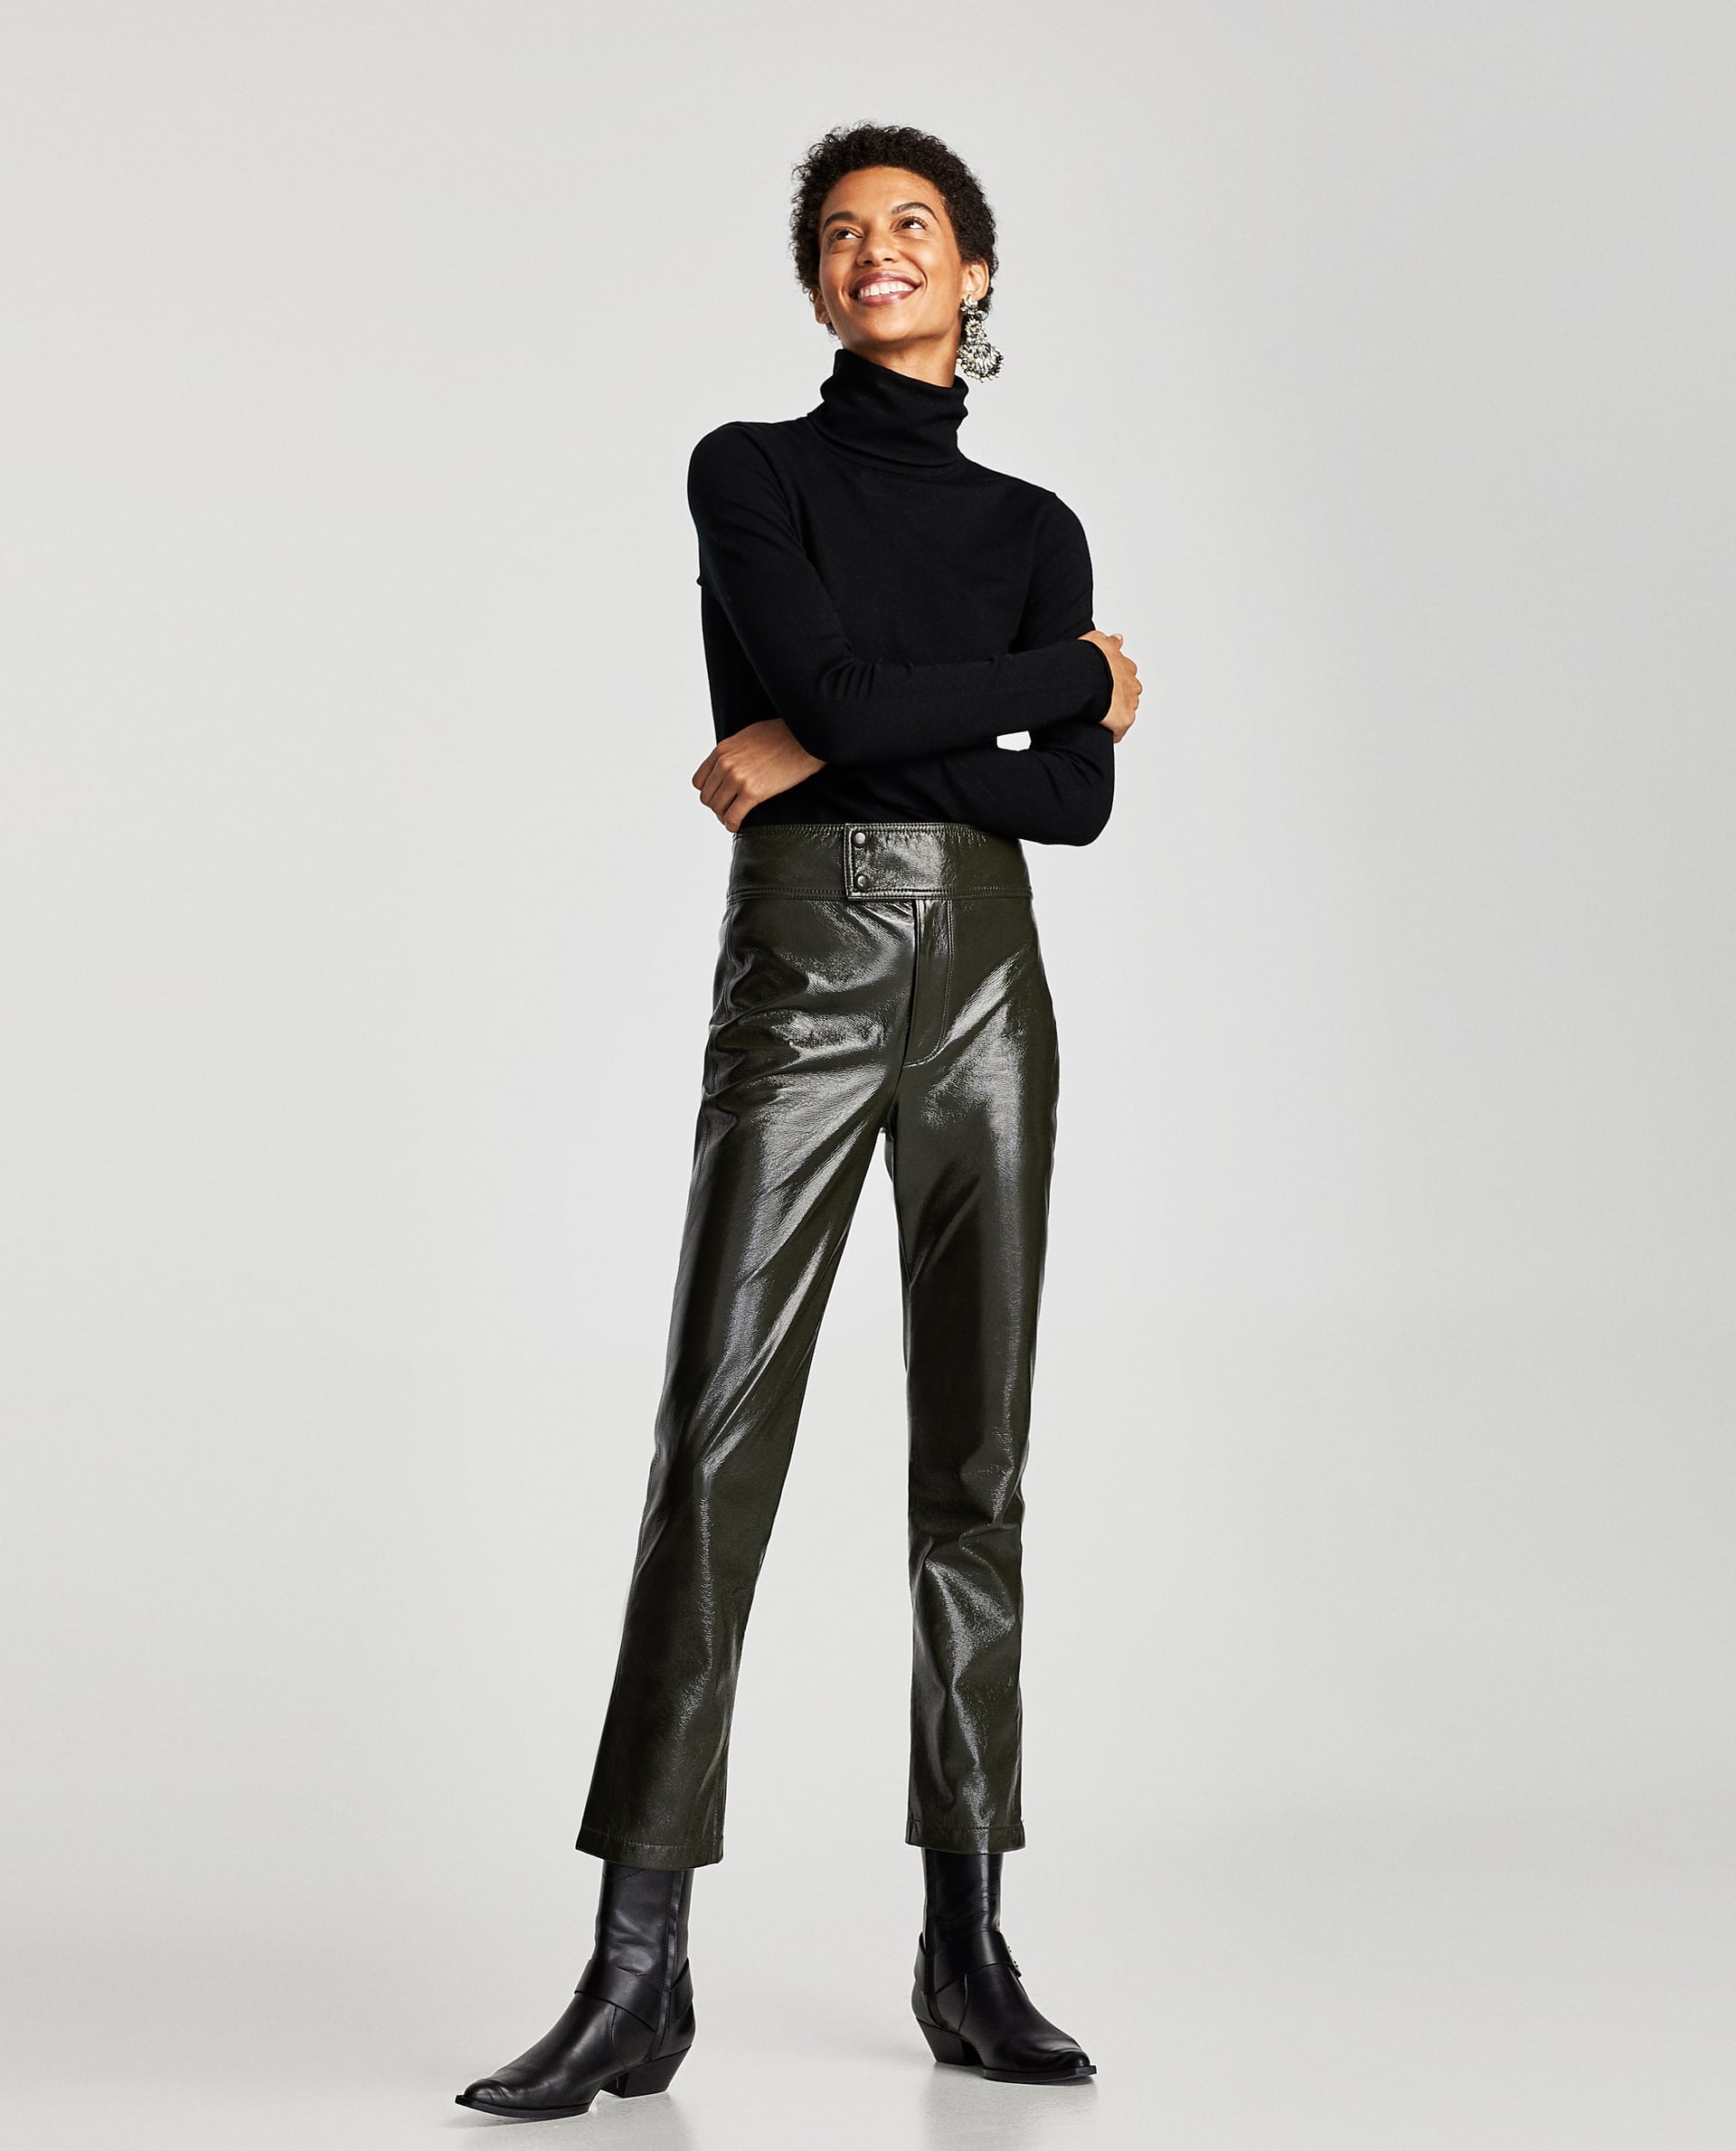 Zara Limited Edition Vinyl Trousers 